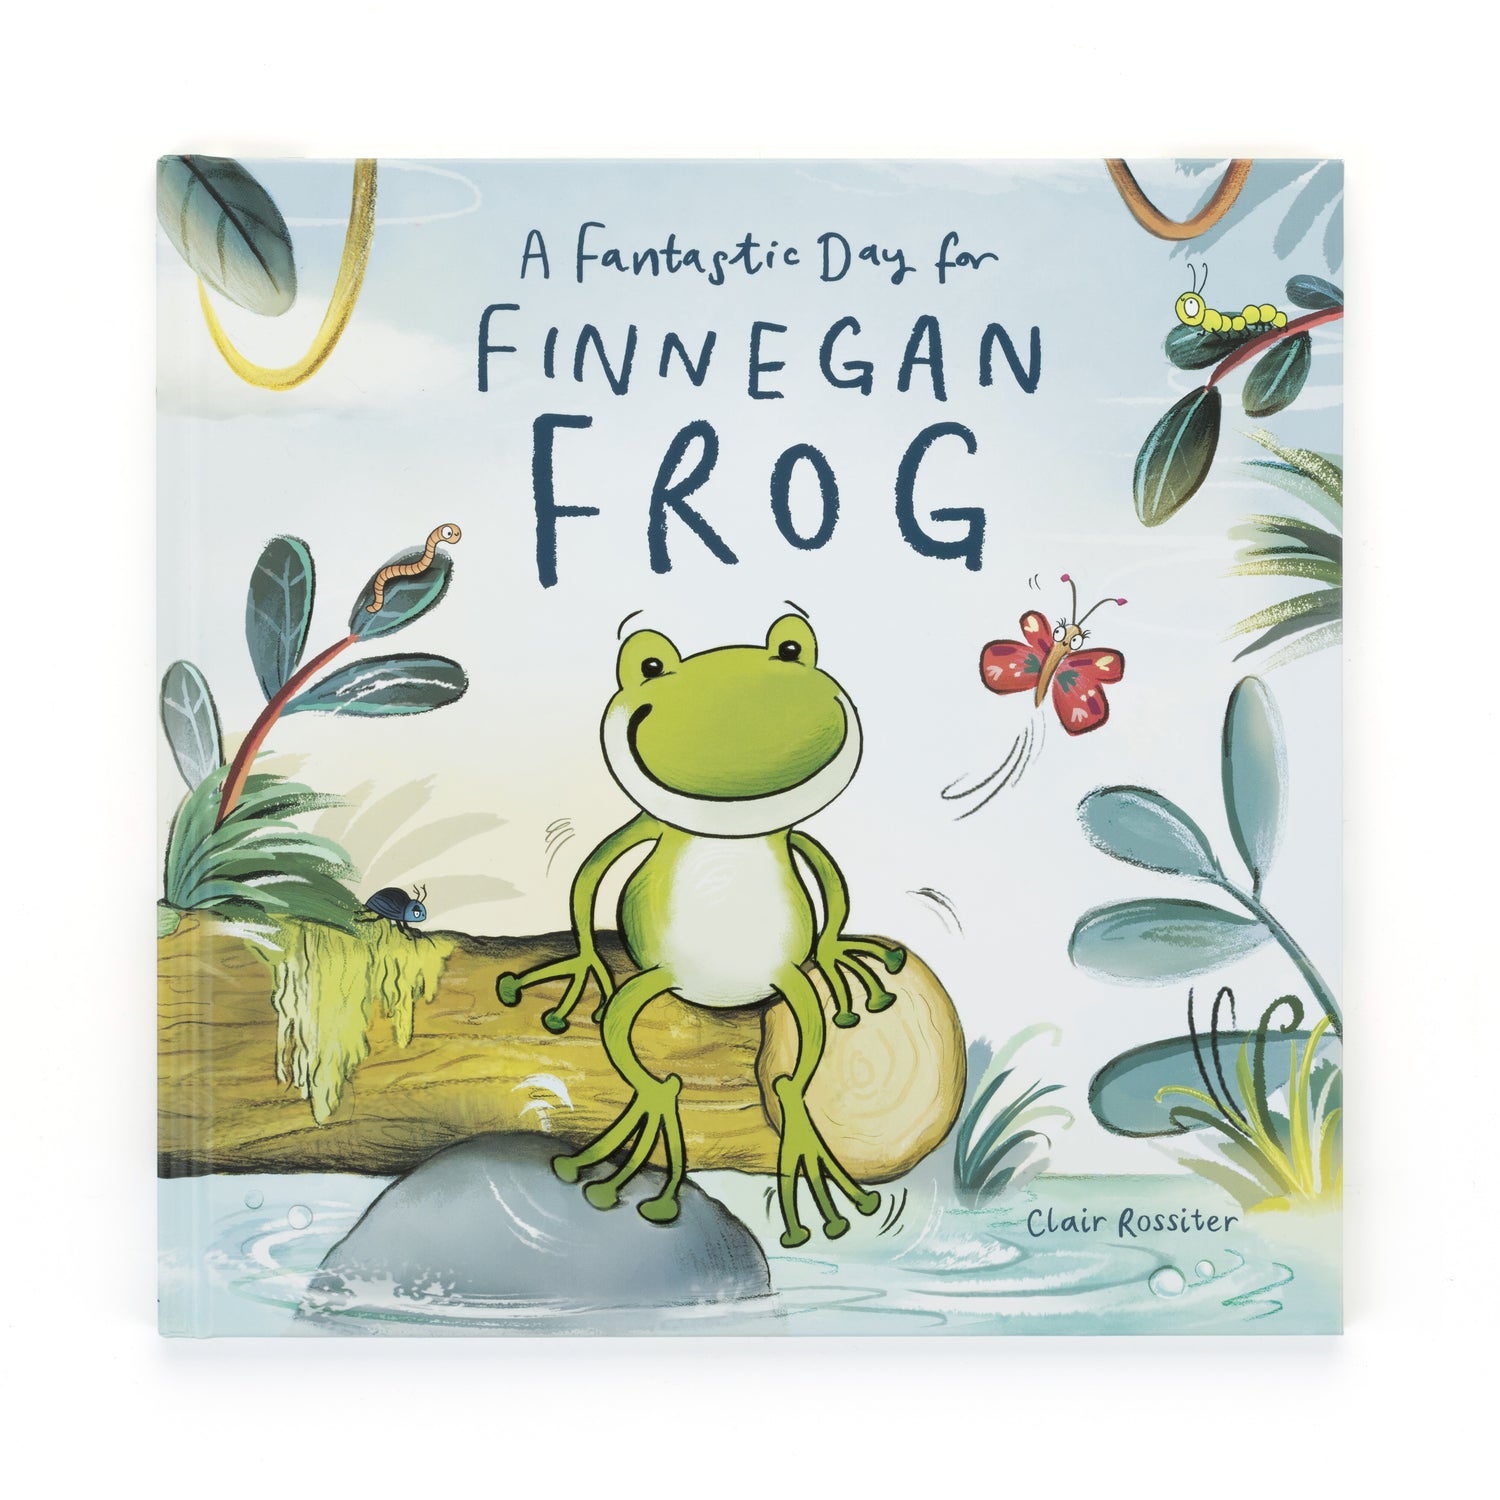 Frog Prince Continued – Books of Wonder